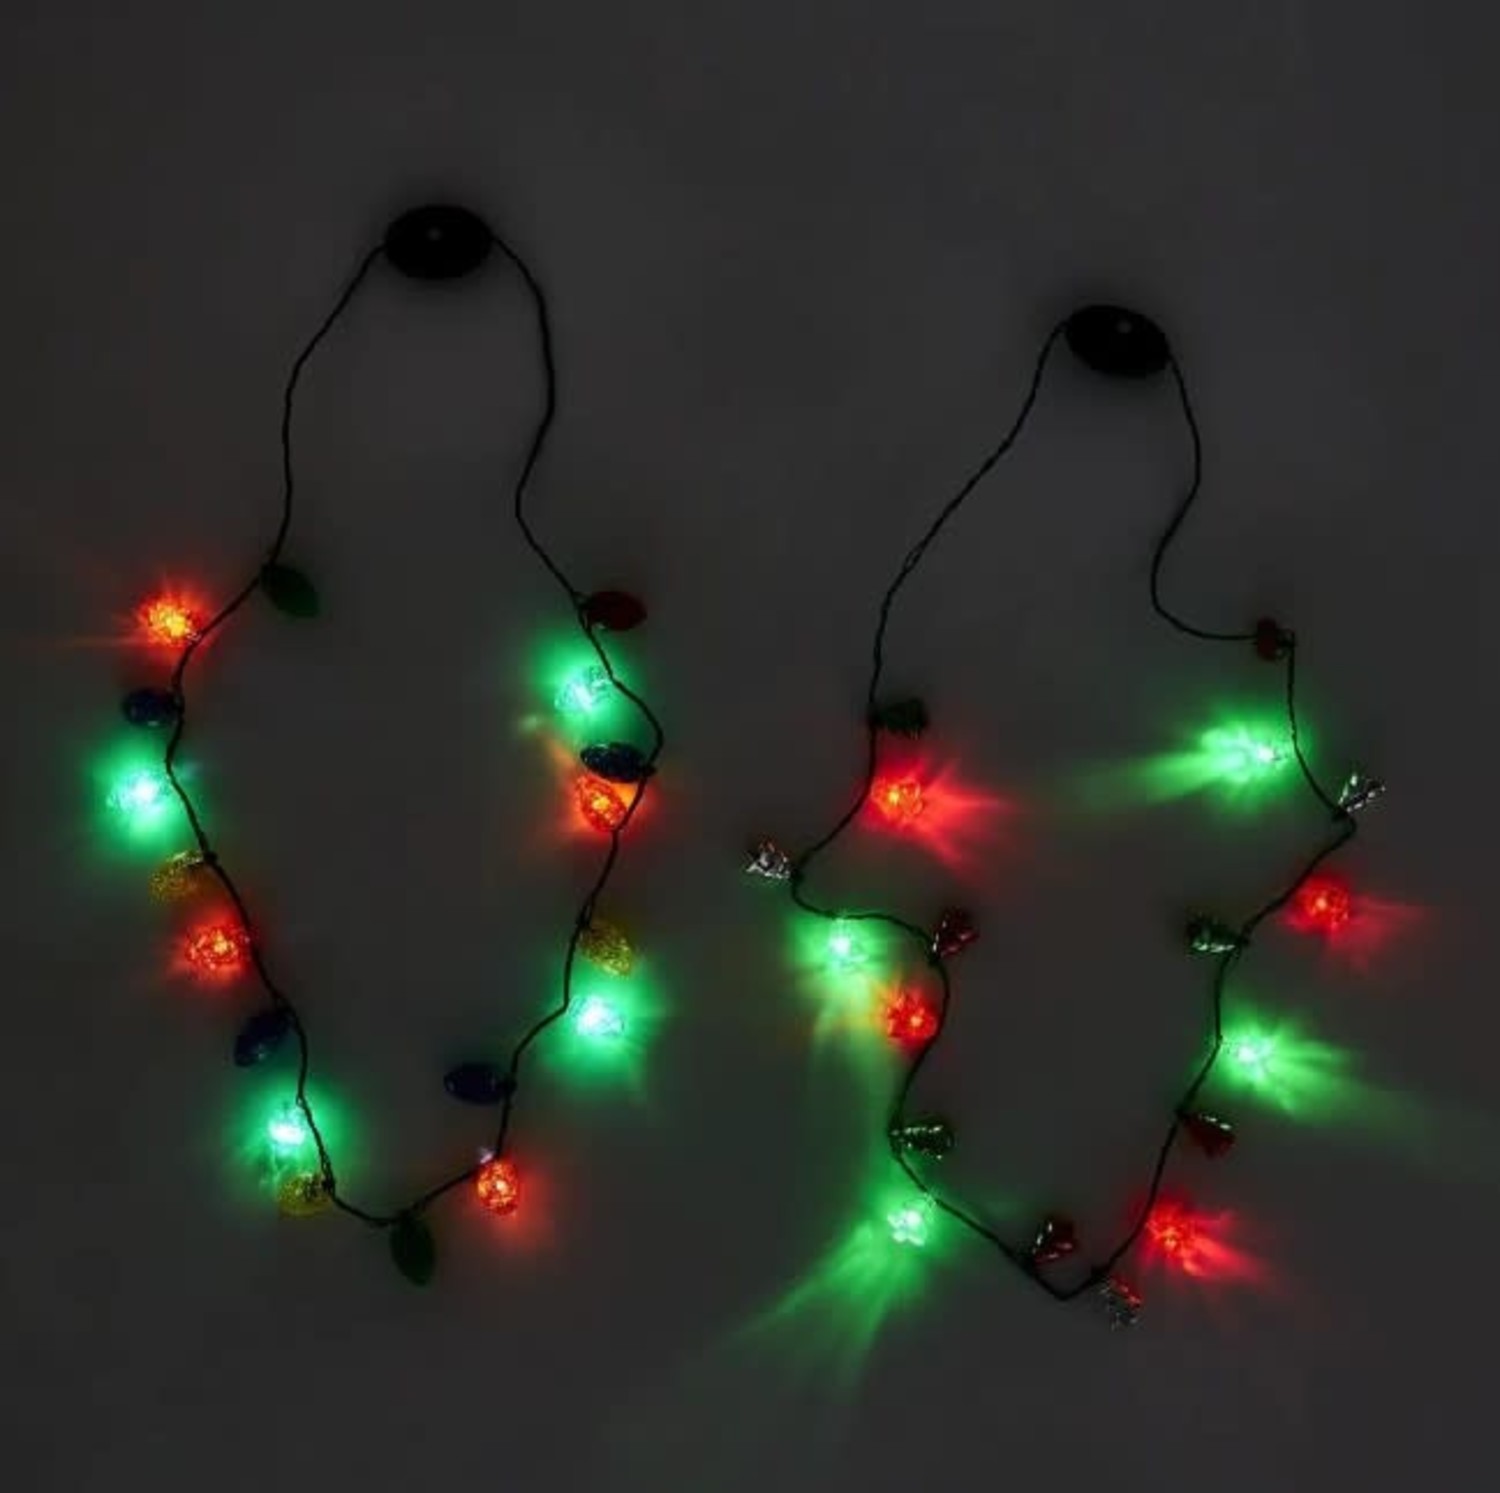 twos company holiday light up necklace in ornament